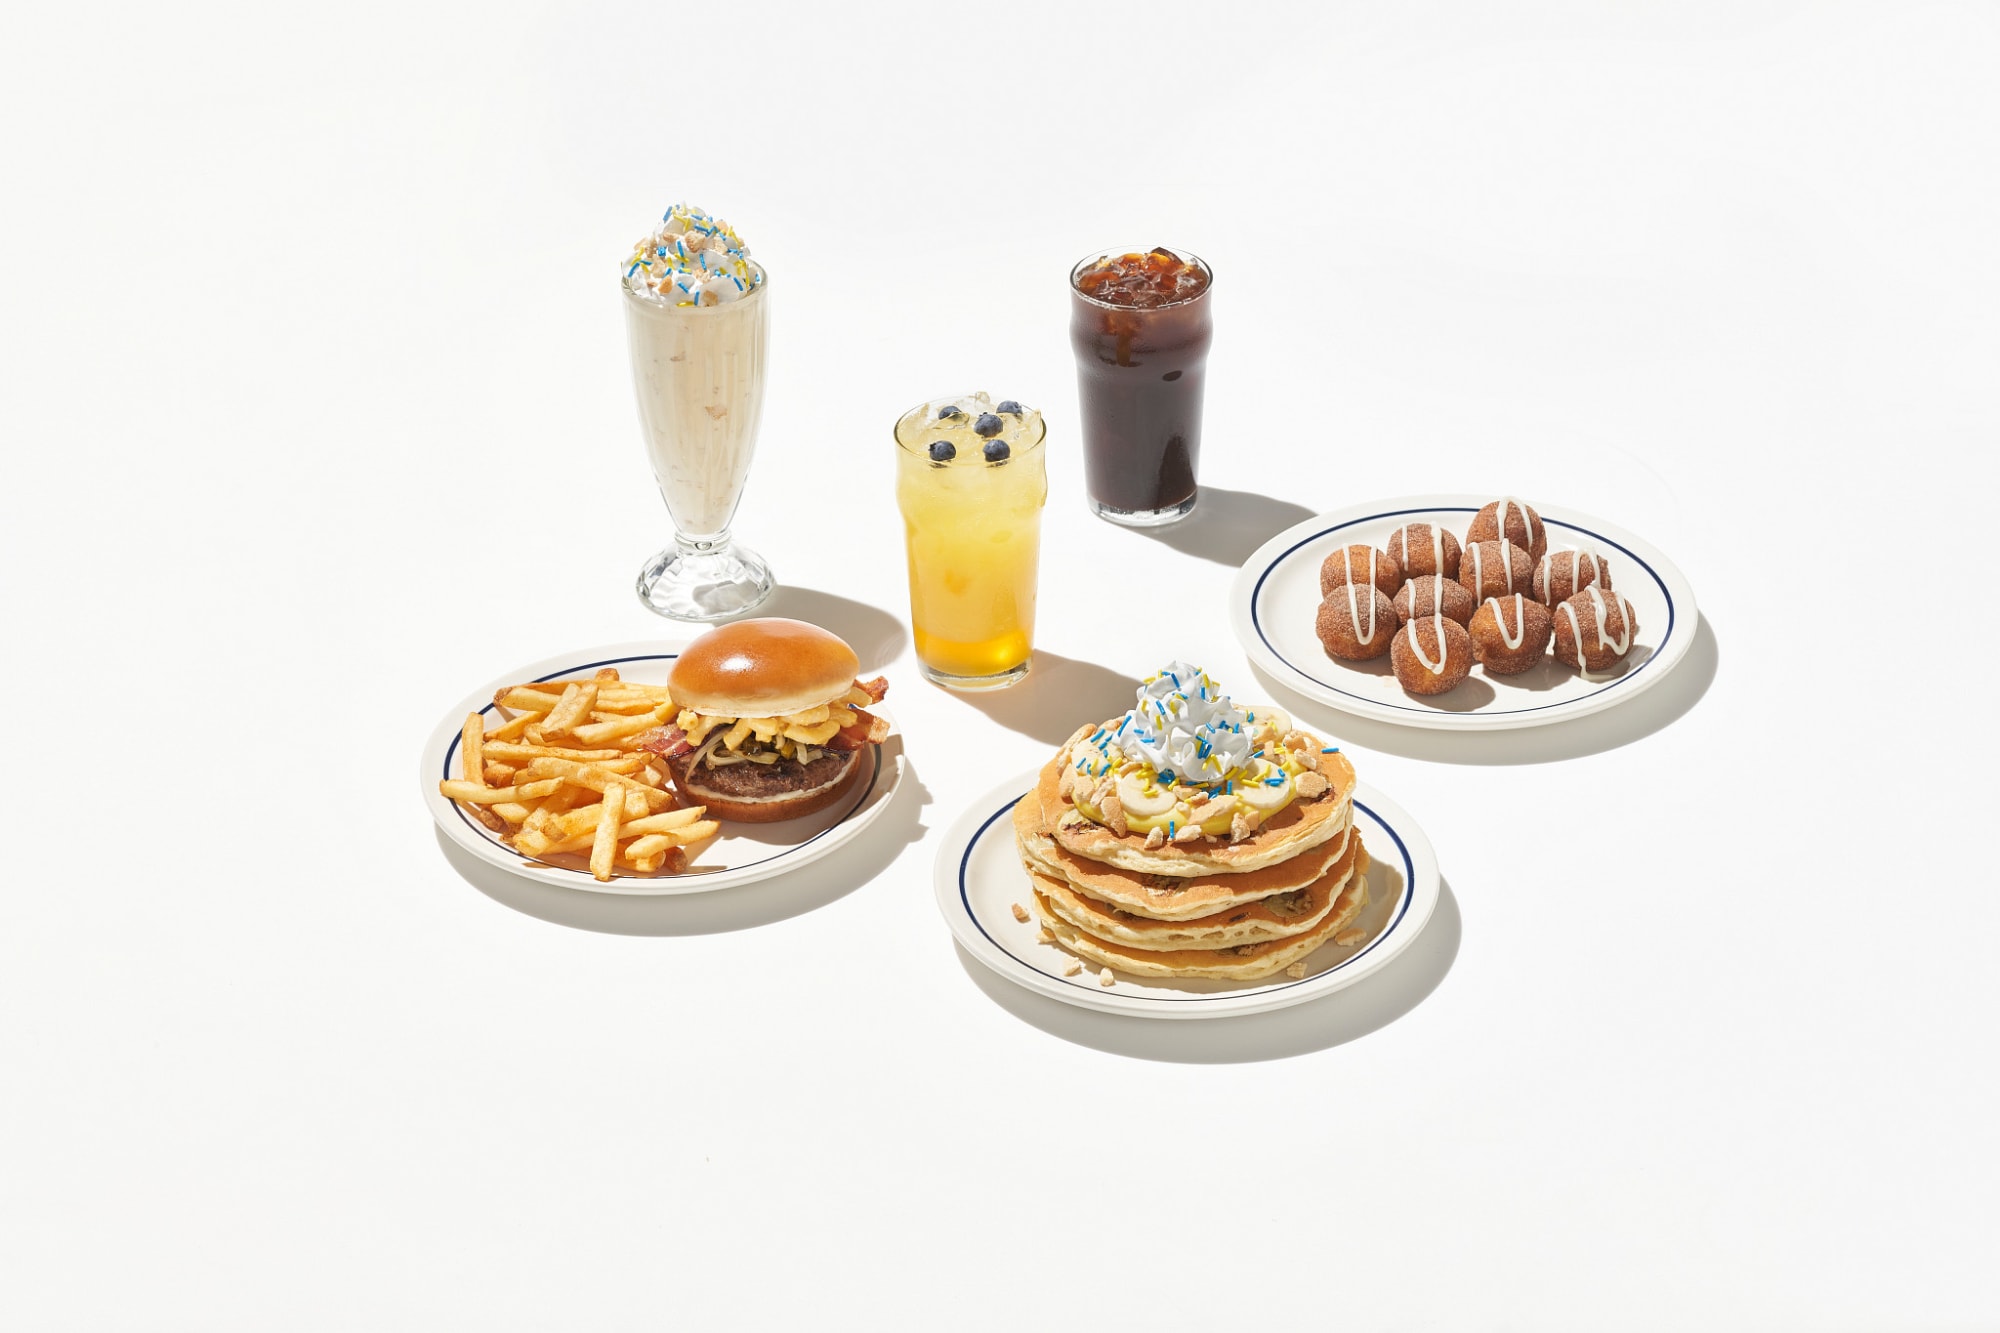 IHOP® Launches Exclusive All-day Minions Menu to Celebrate the